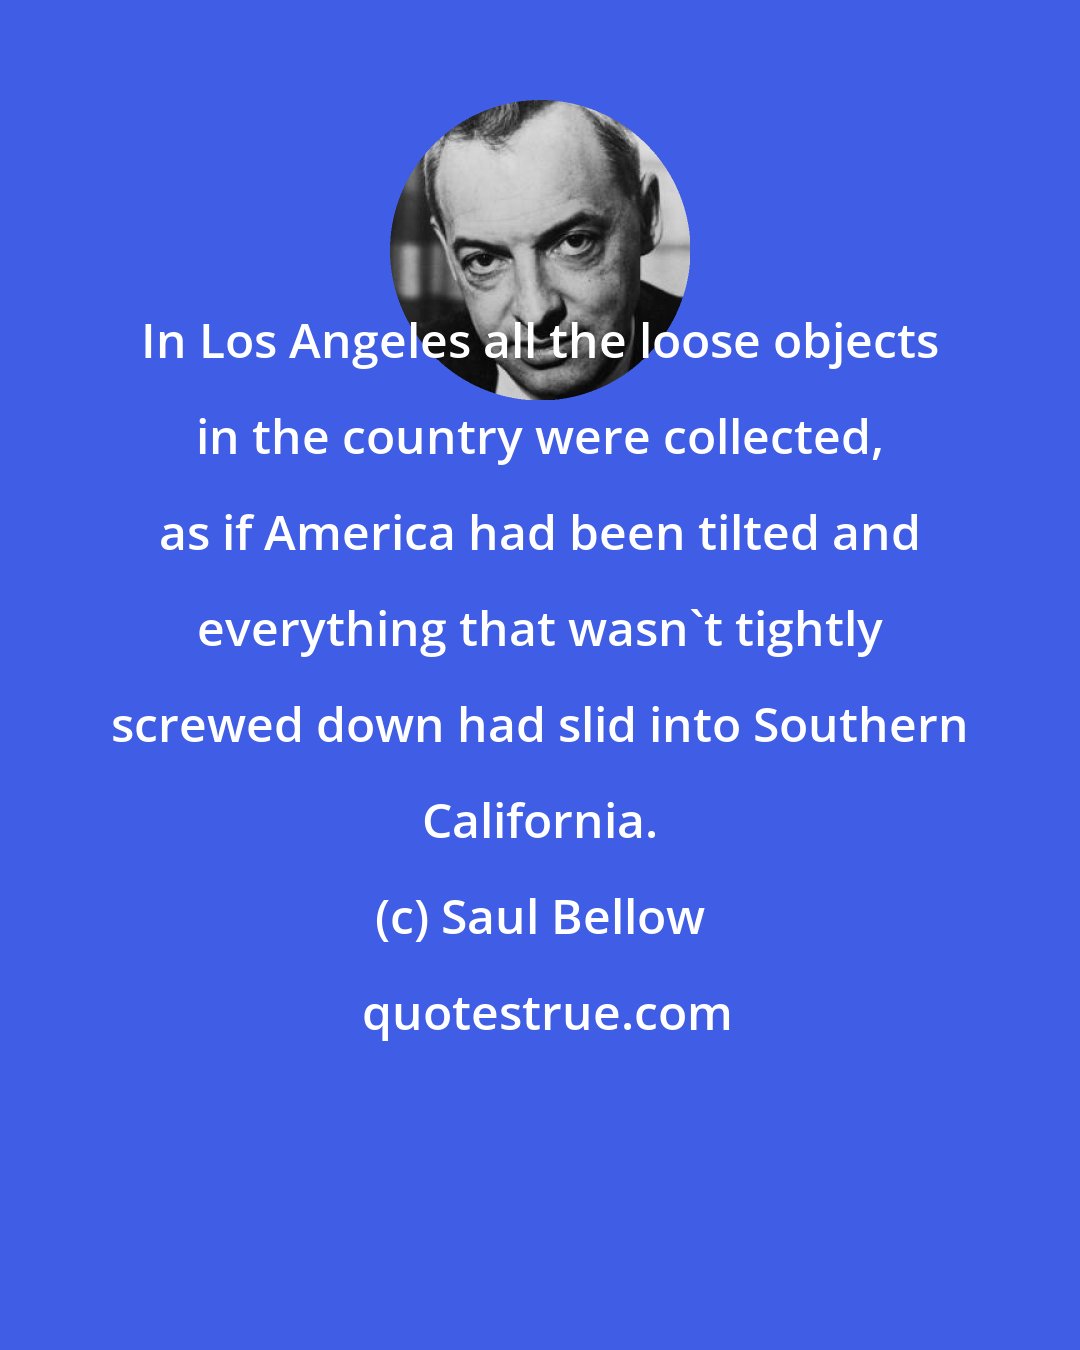 Saul Bellow: In Los Angeles all the loose objects in the country were collected, as if America had been tilted and everything that wasn't tightly screwed down had slid into Southern California.